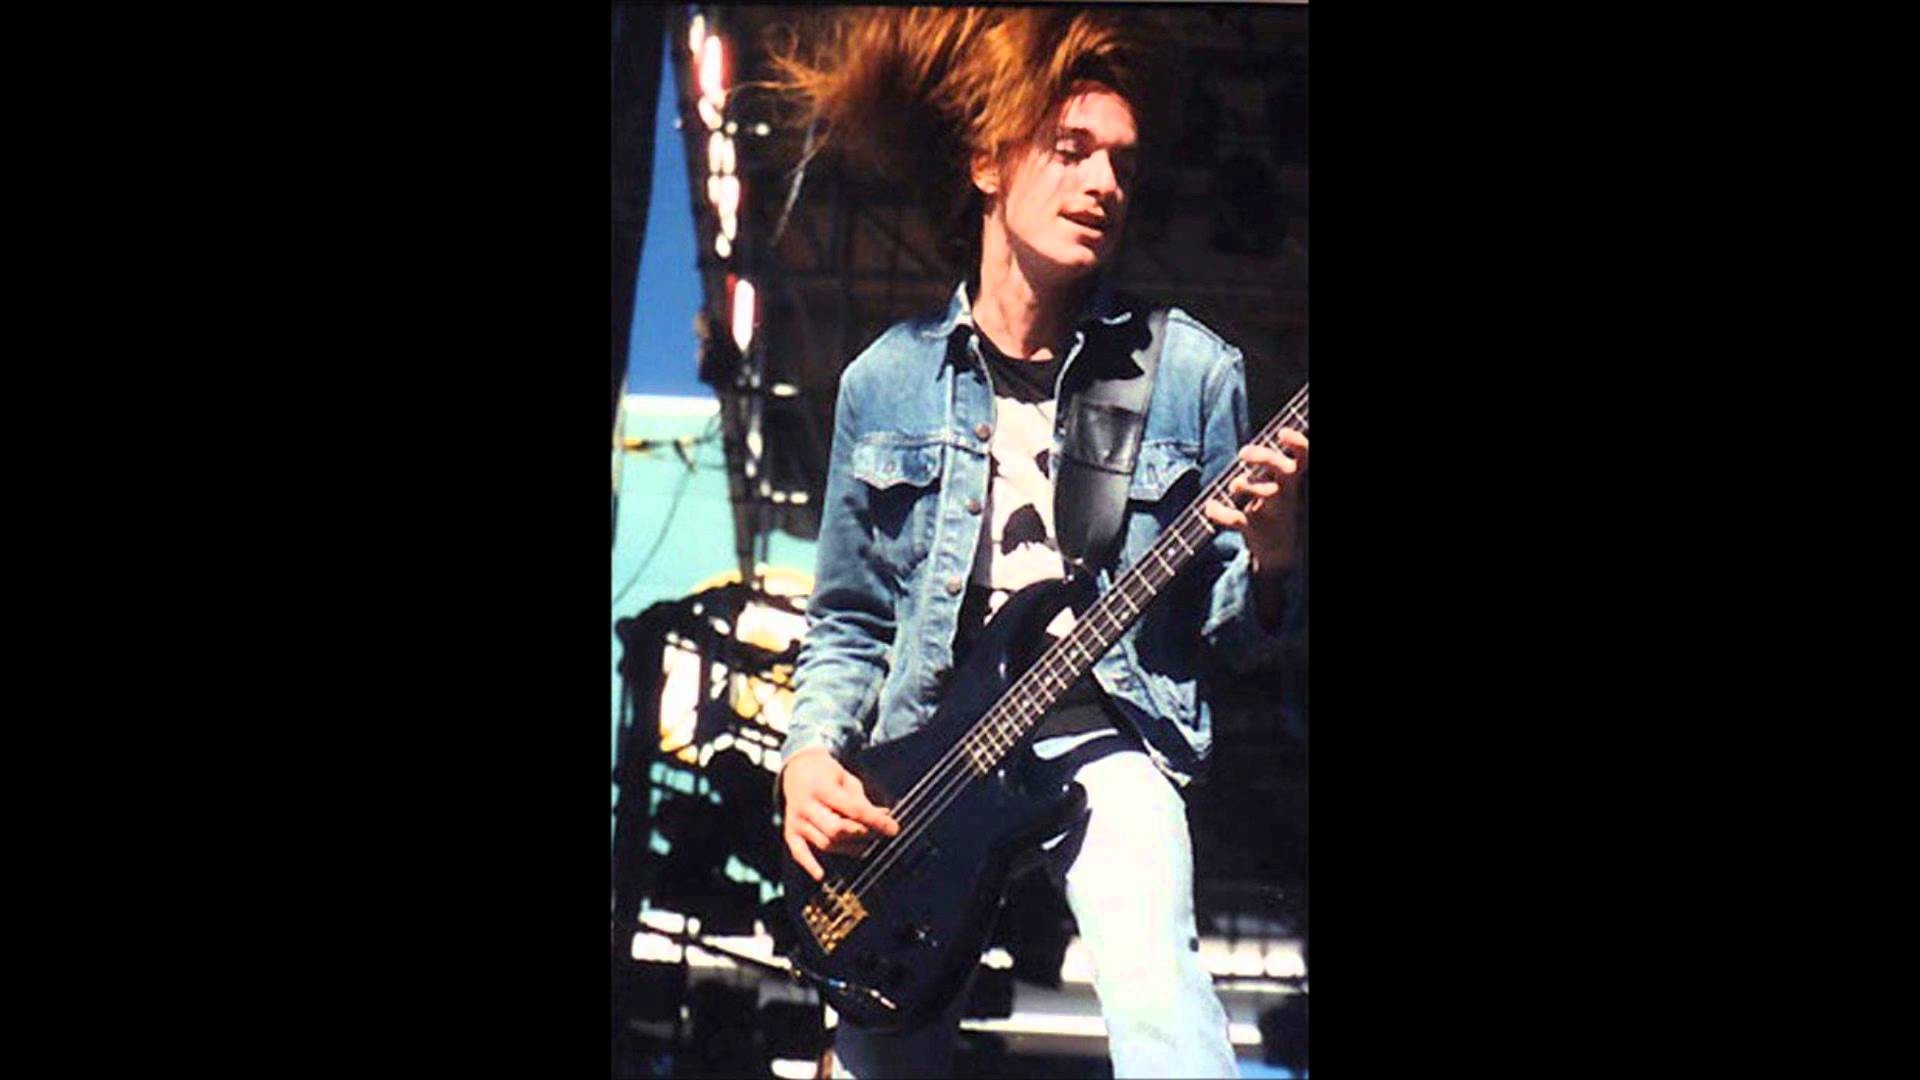 70 Cliff Burton Wallpapers on WallpaperPlay